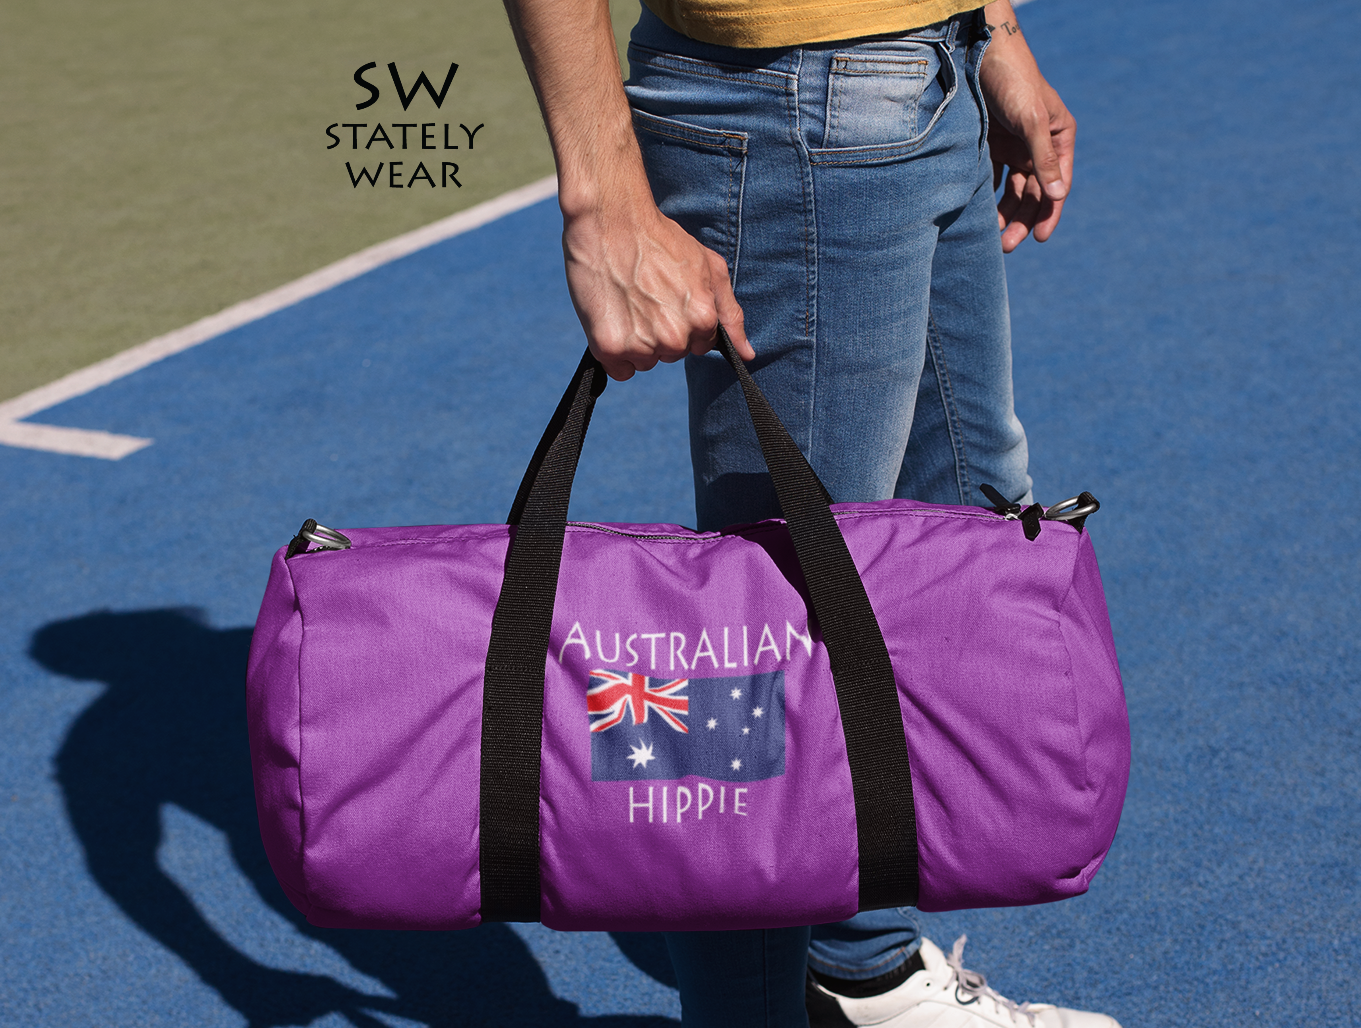 Stately Wear's Australian Flag Hippie duffel bag.  We are a Katie Couric Shop partner. The perfect accessory as a beach bag, ski bag, travel bag & gym or yoga bag.  Custom made one-at-a-time.  Environmentally friendly. Biodegradable inks & dyes.  Good for the planet.  2 sizes to choose.